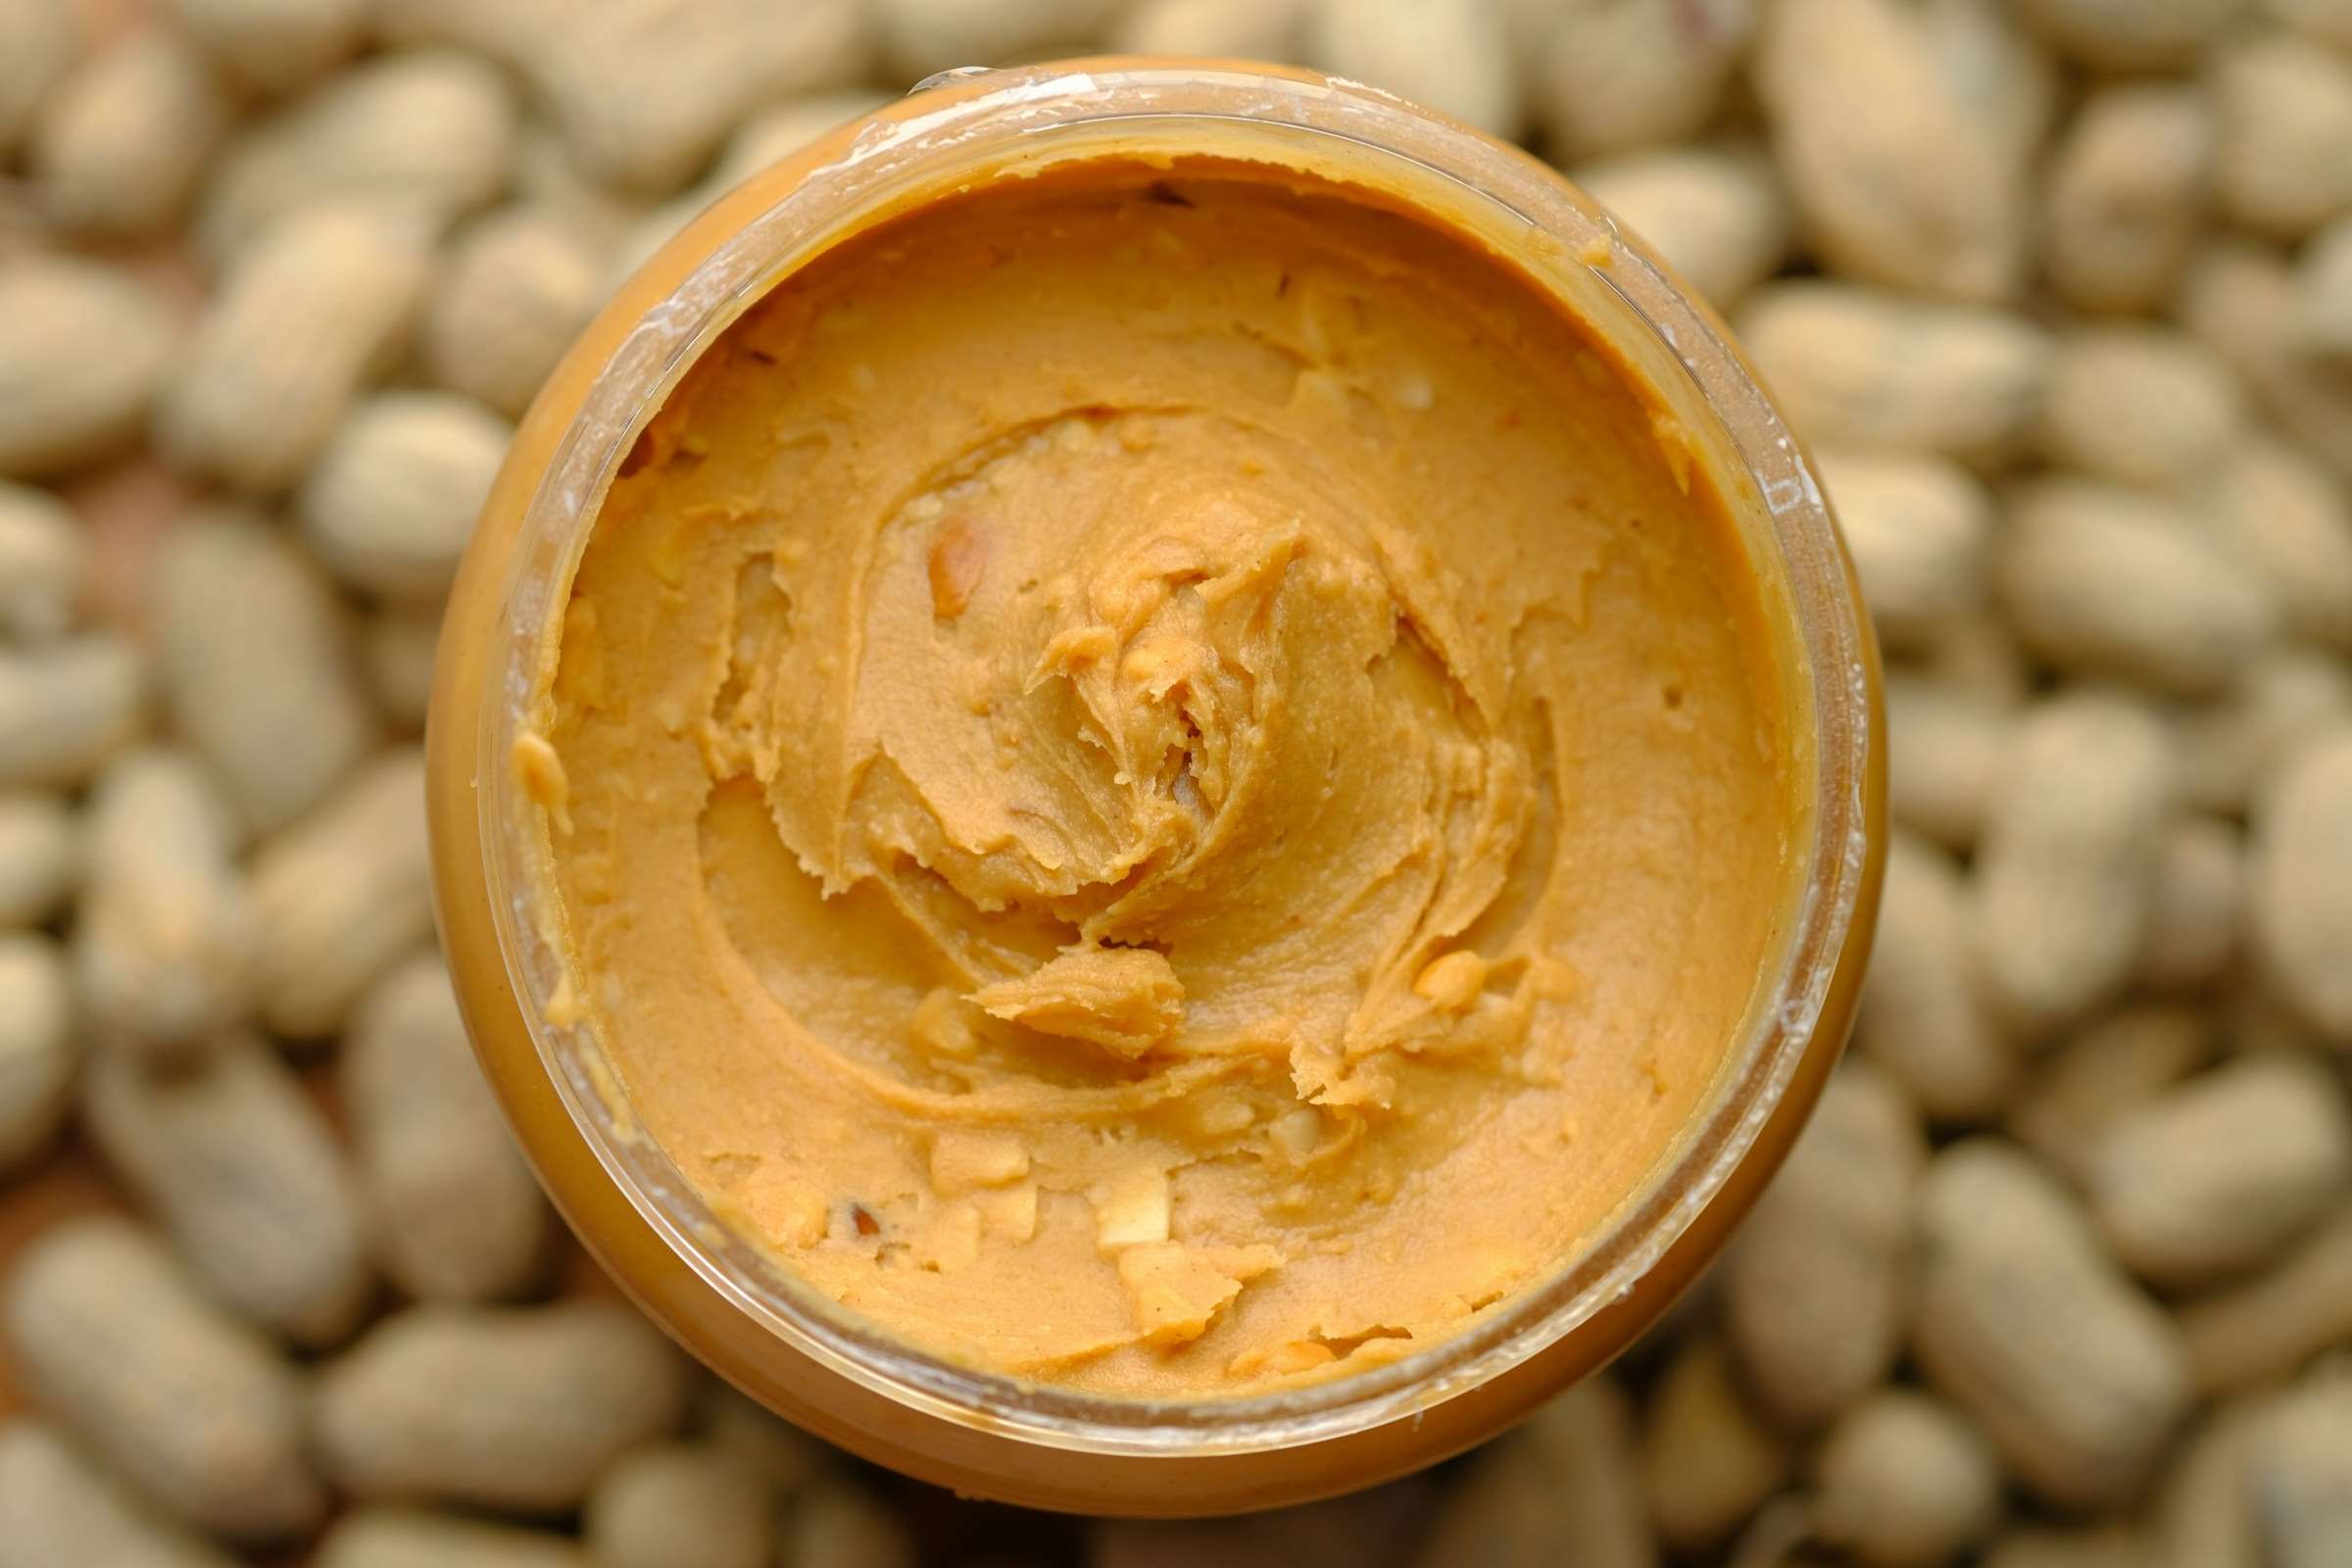 Peanut butter panic: These products are safe